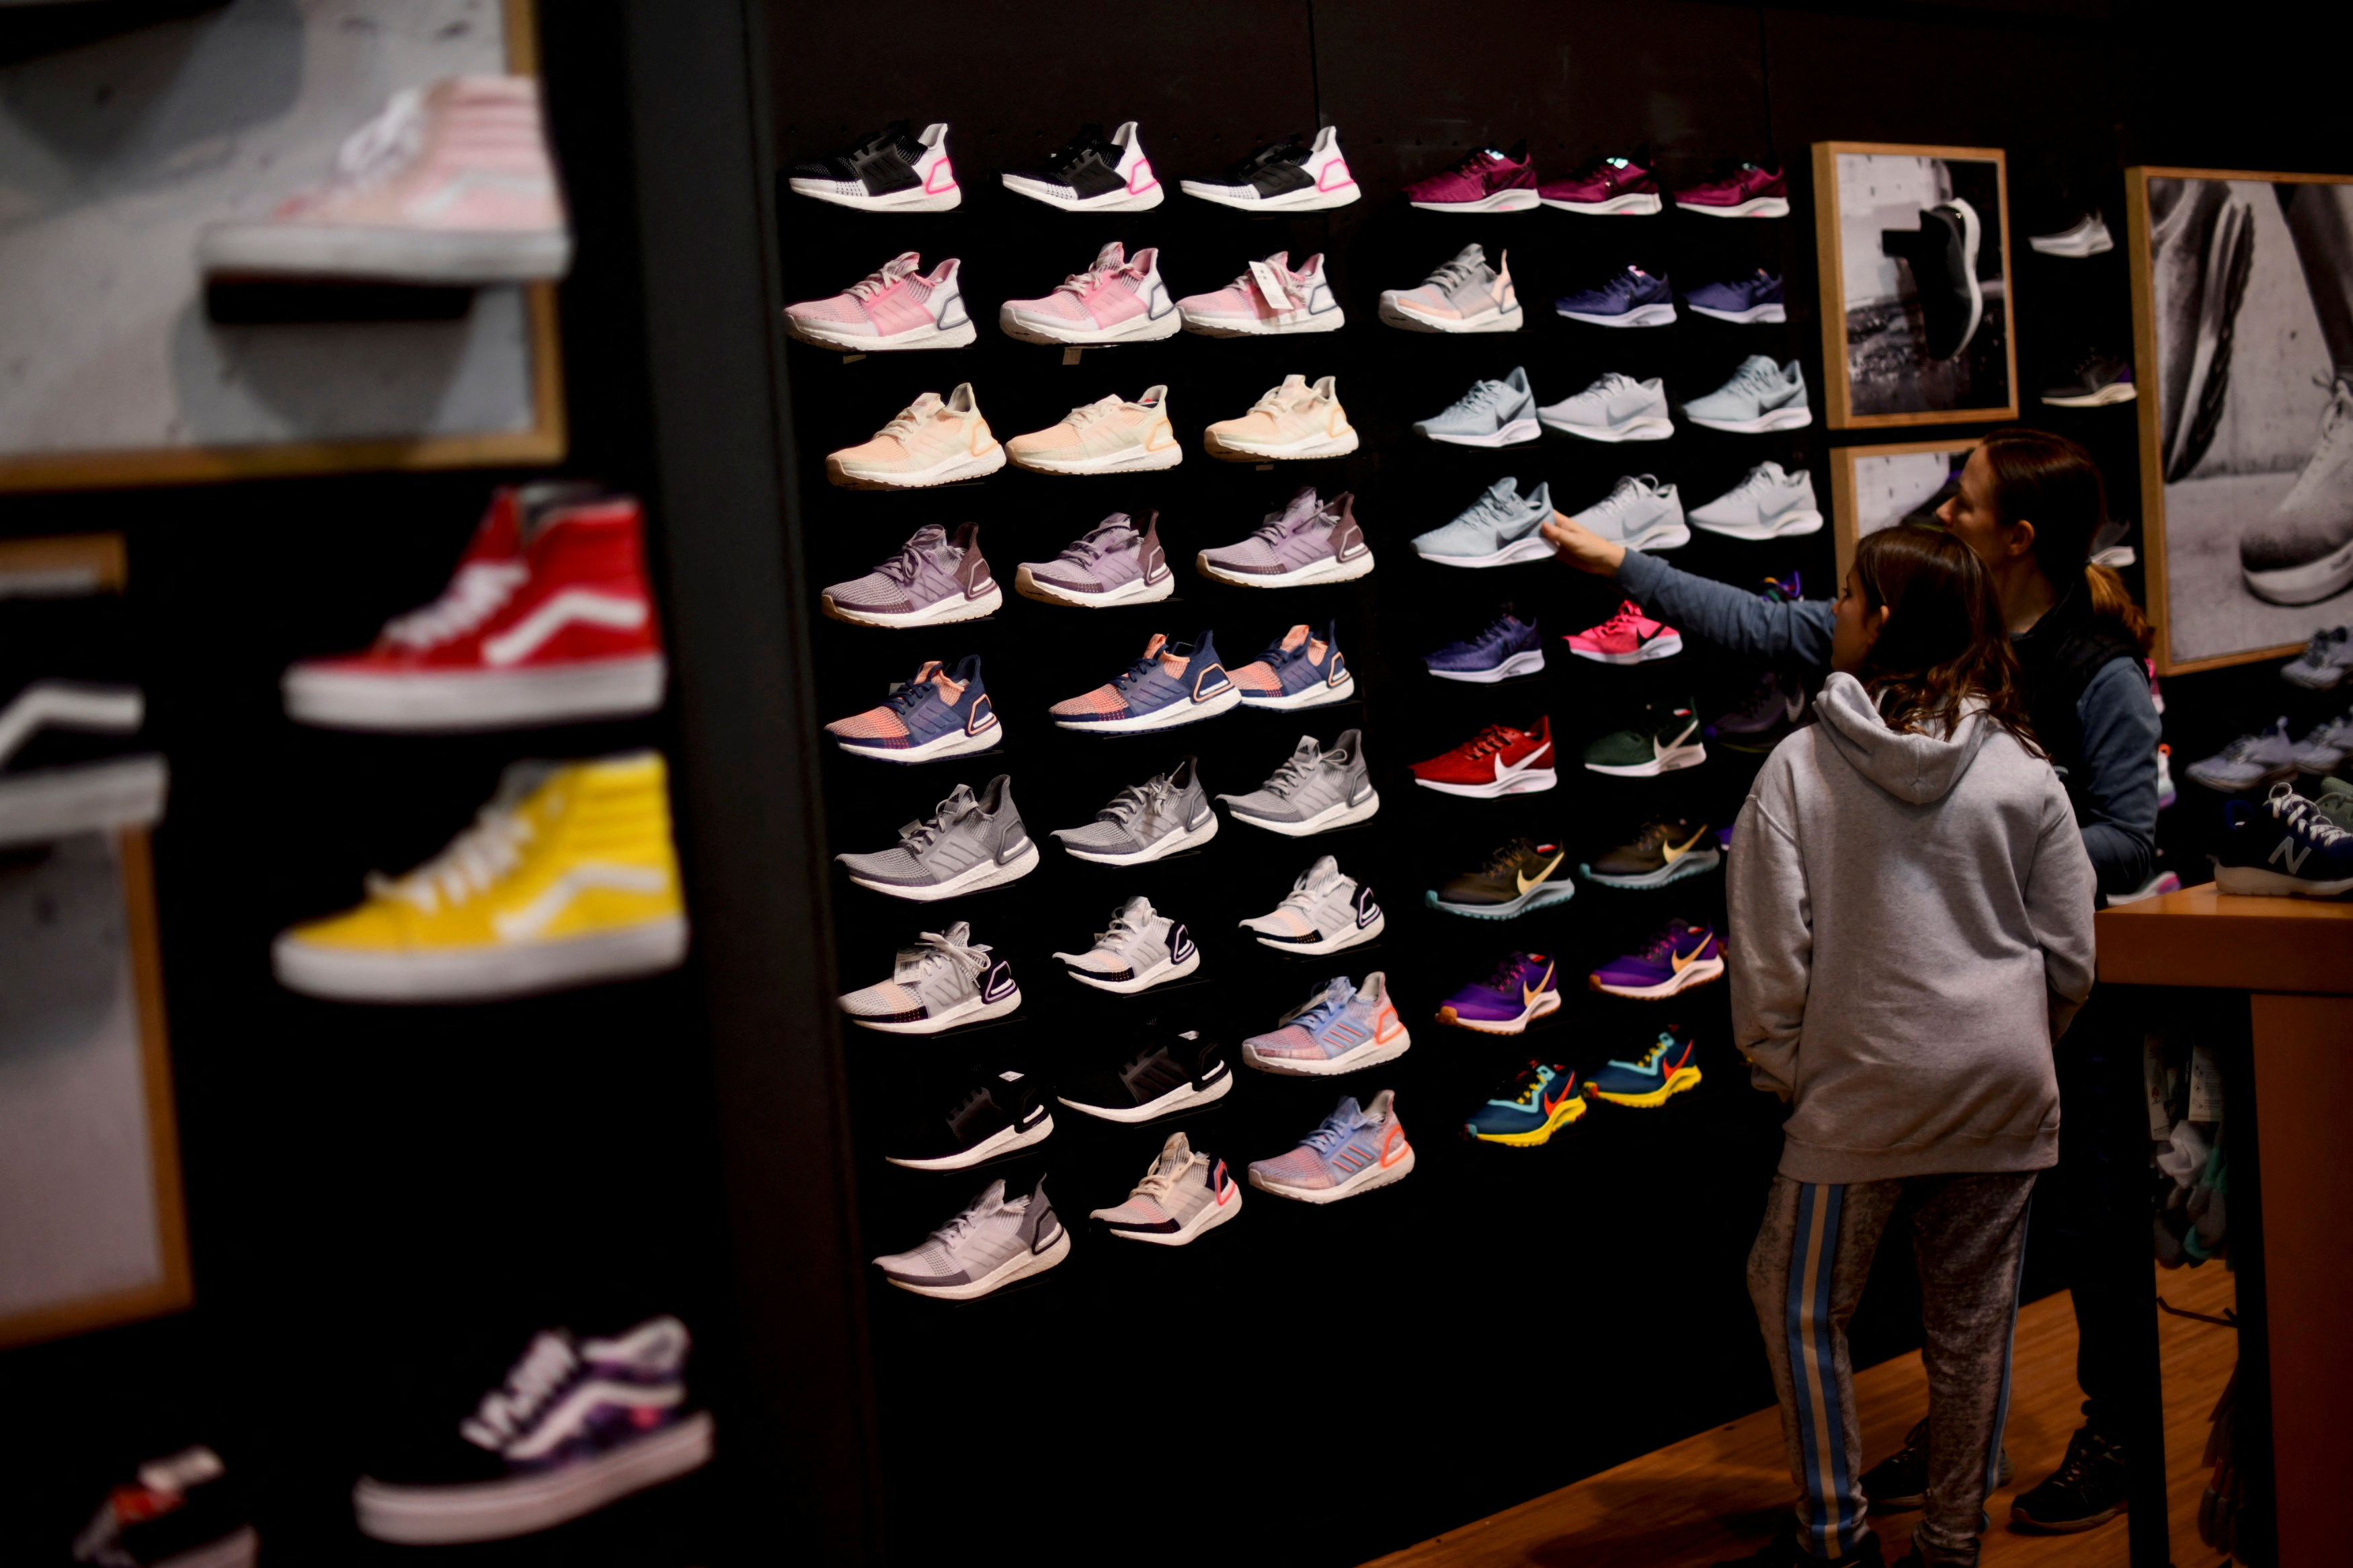 Shoe Carnival Sees Customer Shift to Non-Athletic - Footwear Insight